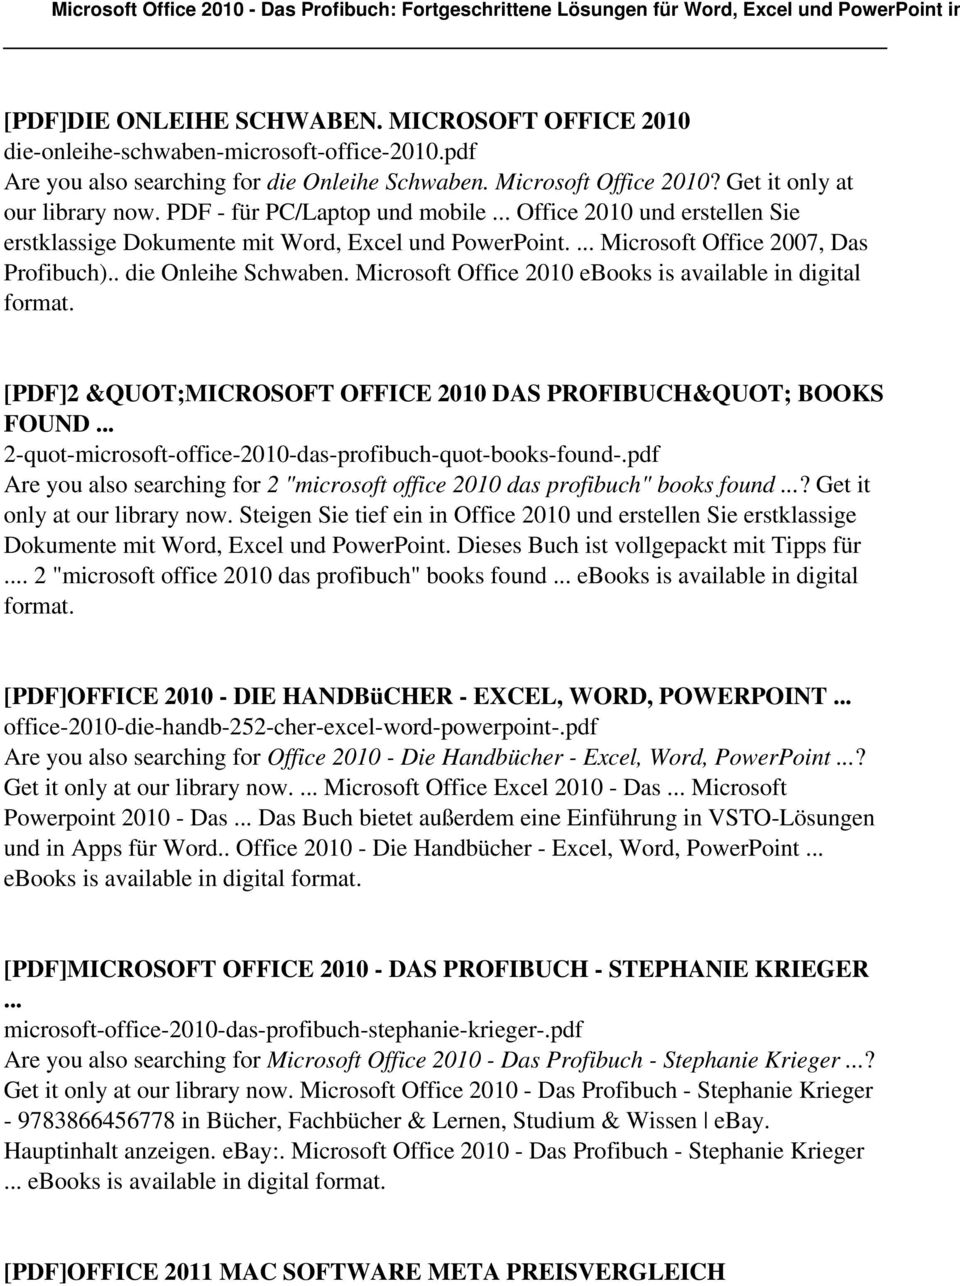 Microsoft Office 2010 ebooks is available in digital [PDF]2 &QUOT;MICROSOFT OFFICE 2010 DAS PROFIBUCH&QUOT; BOOKS FOUND 2-quot-microsoft-office-2010-das-profibuch-quot-books-found-.